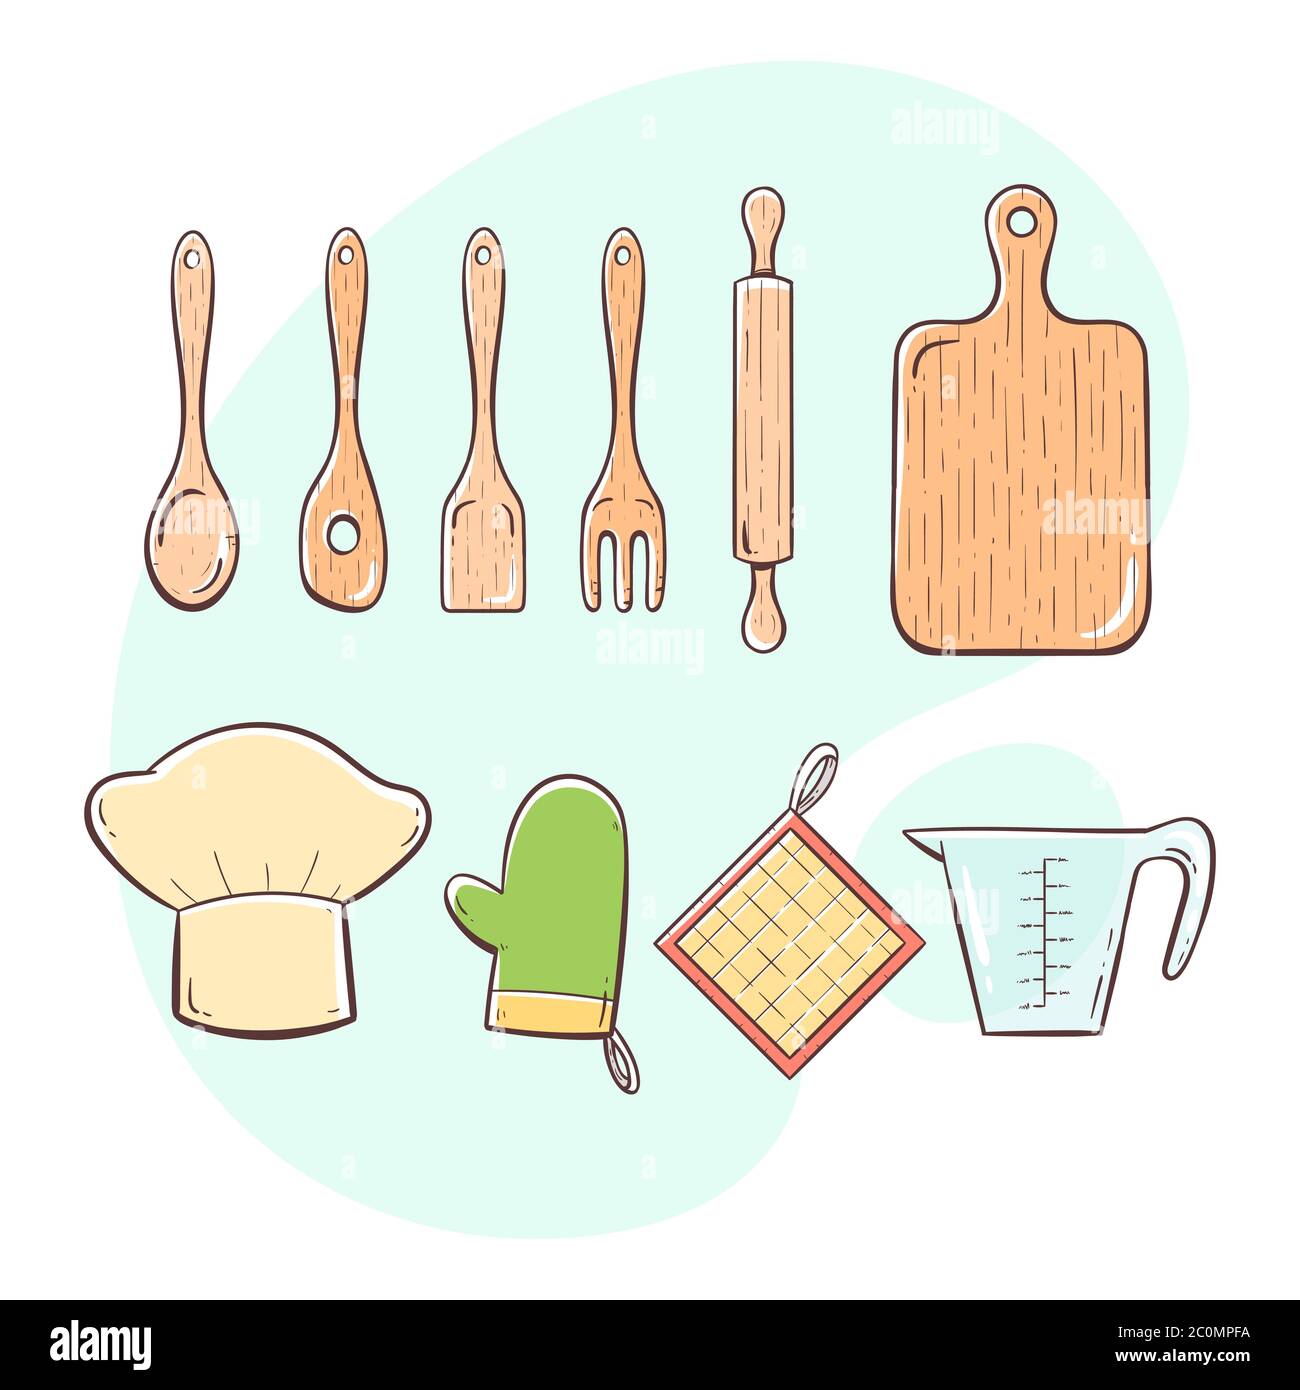 Cooking tools. Collection of kitchen utensils for cooking, serving, stirring and cutting. Hand drawn colorful style collection. Stock Vector